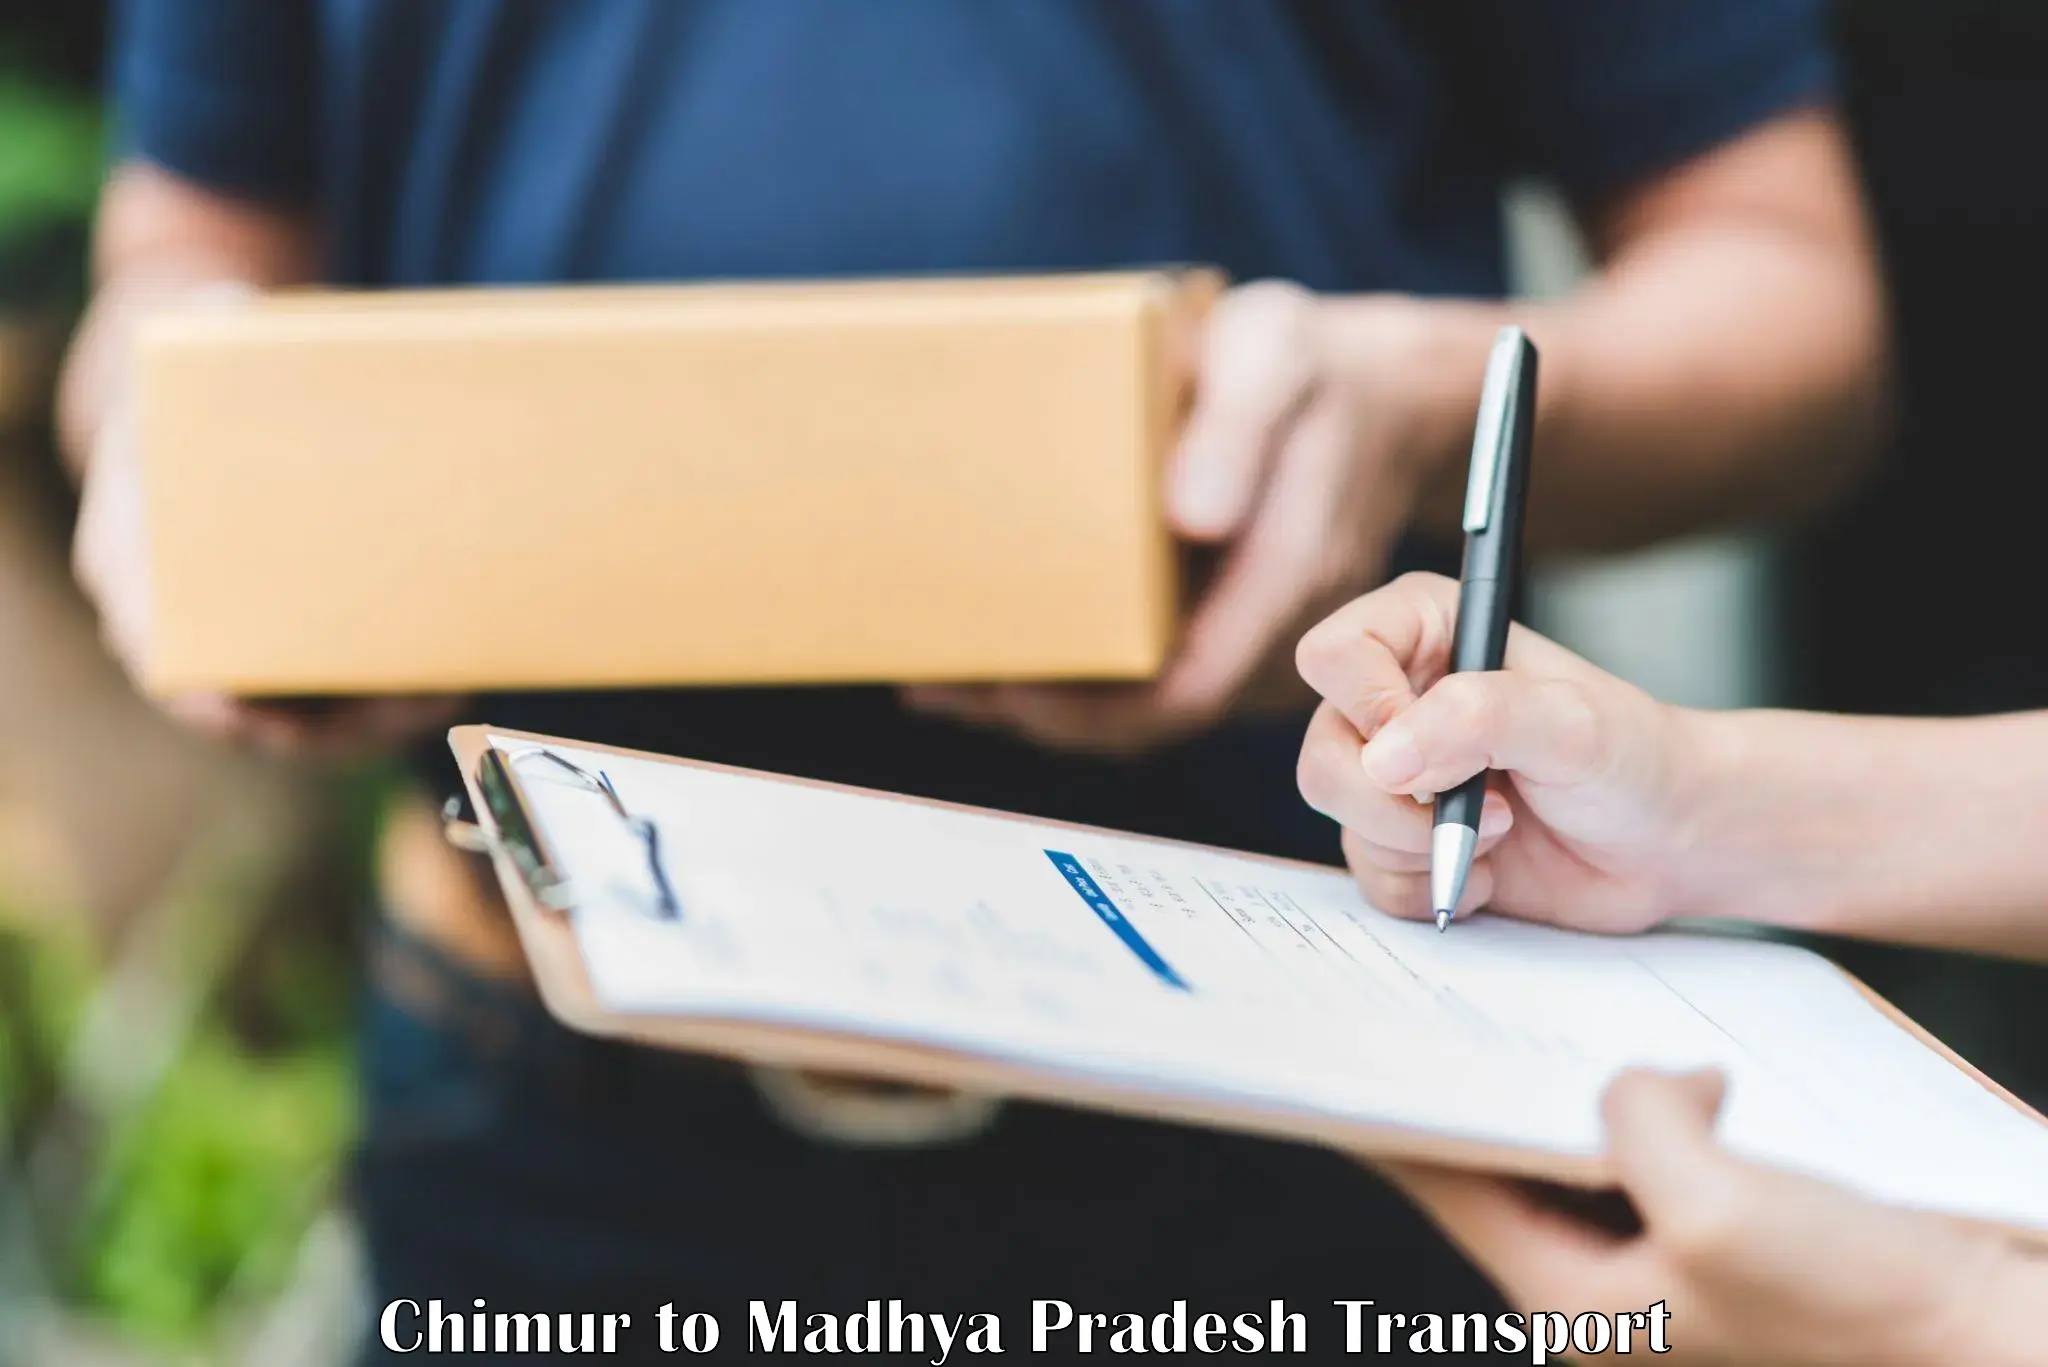 Truck transport companies in India Chimur to Chhindwara